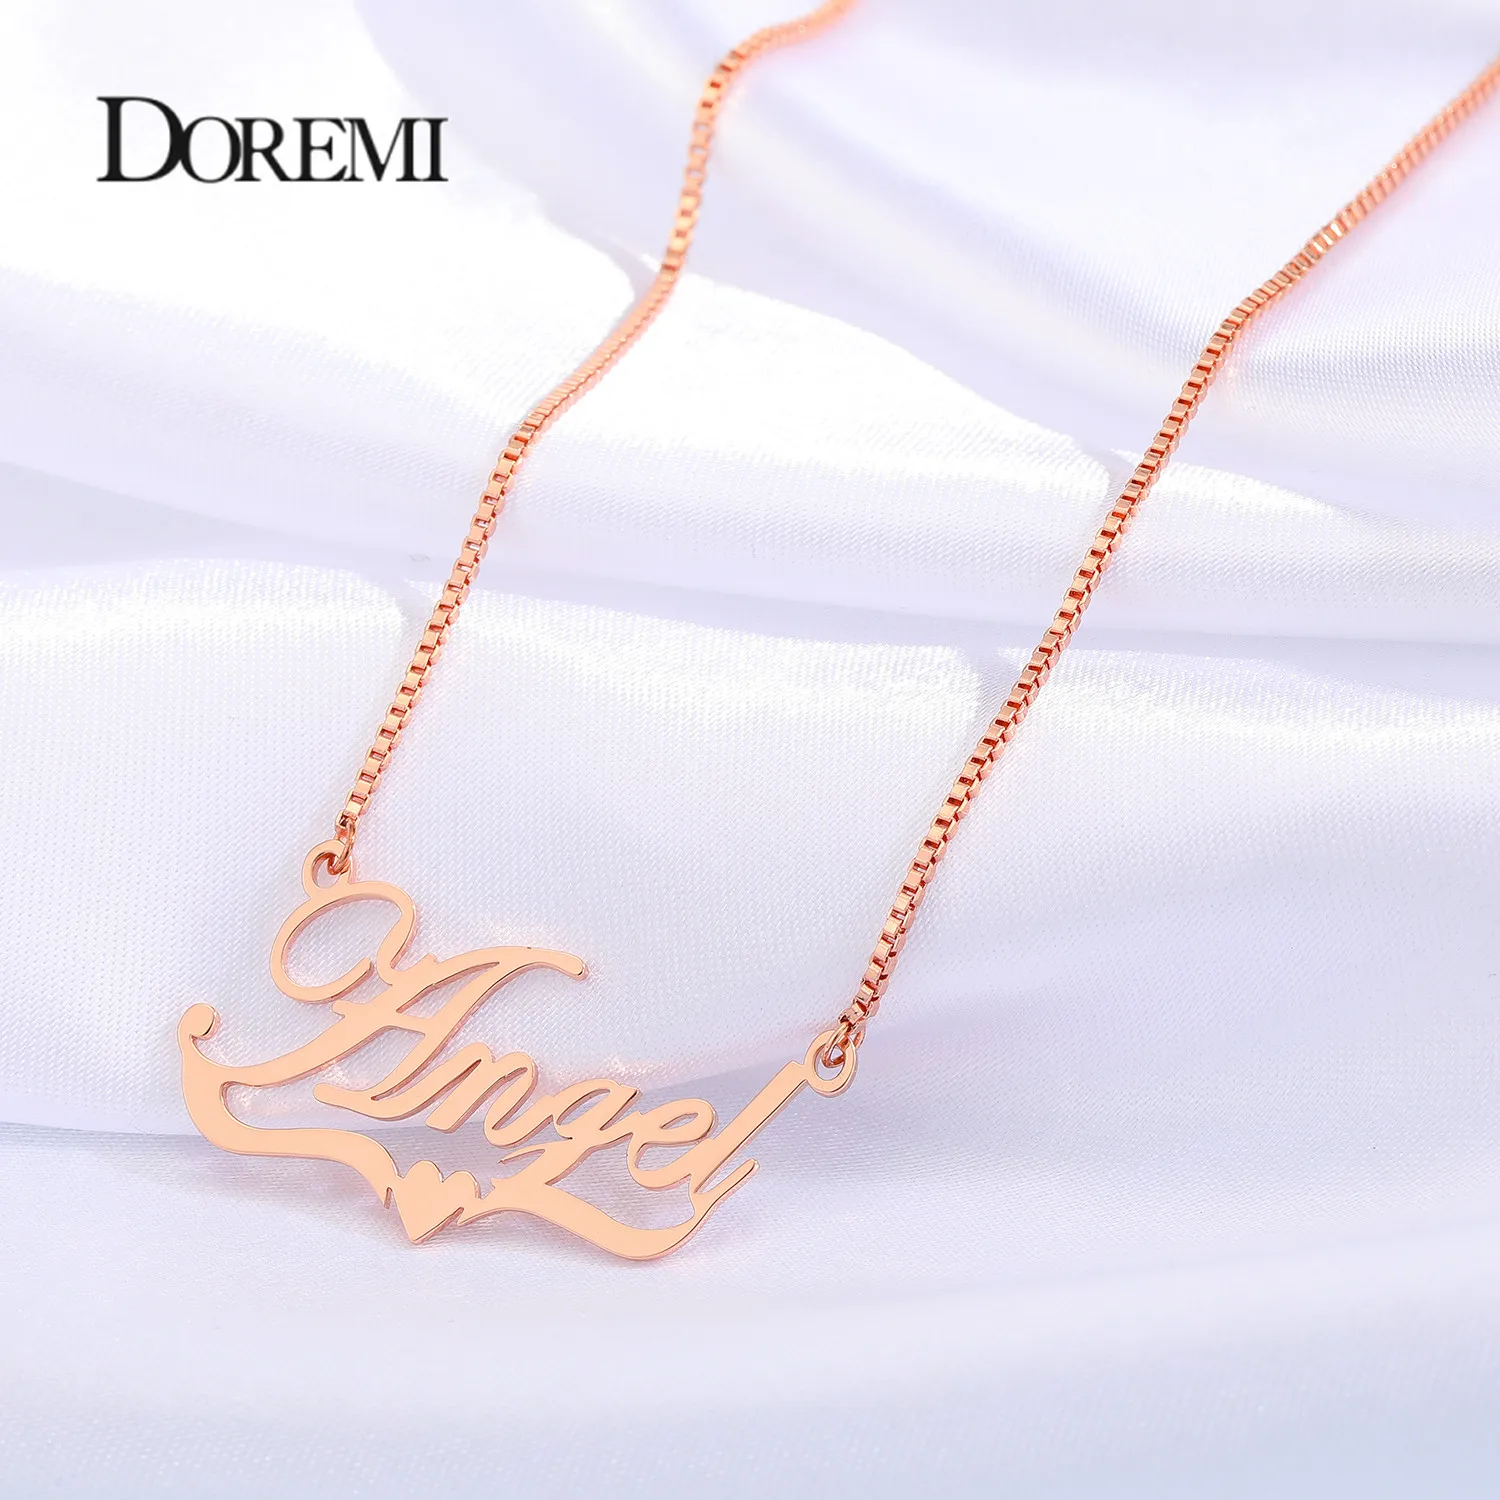 DOREMI Stainless Steel  Custom Name Necklace Personalized Name Pendant Heart Choker for Women Men Jewelry Valentine's Day Gift paramour valentine s stolen heart 40